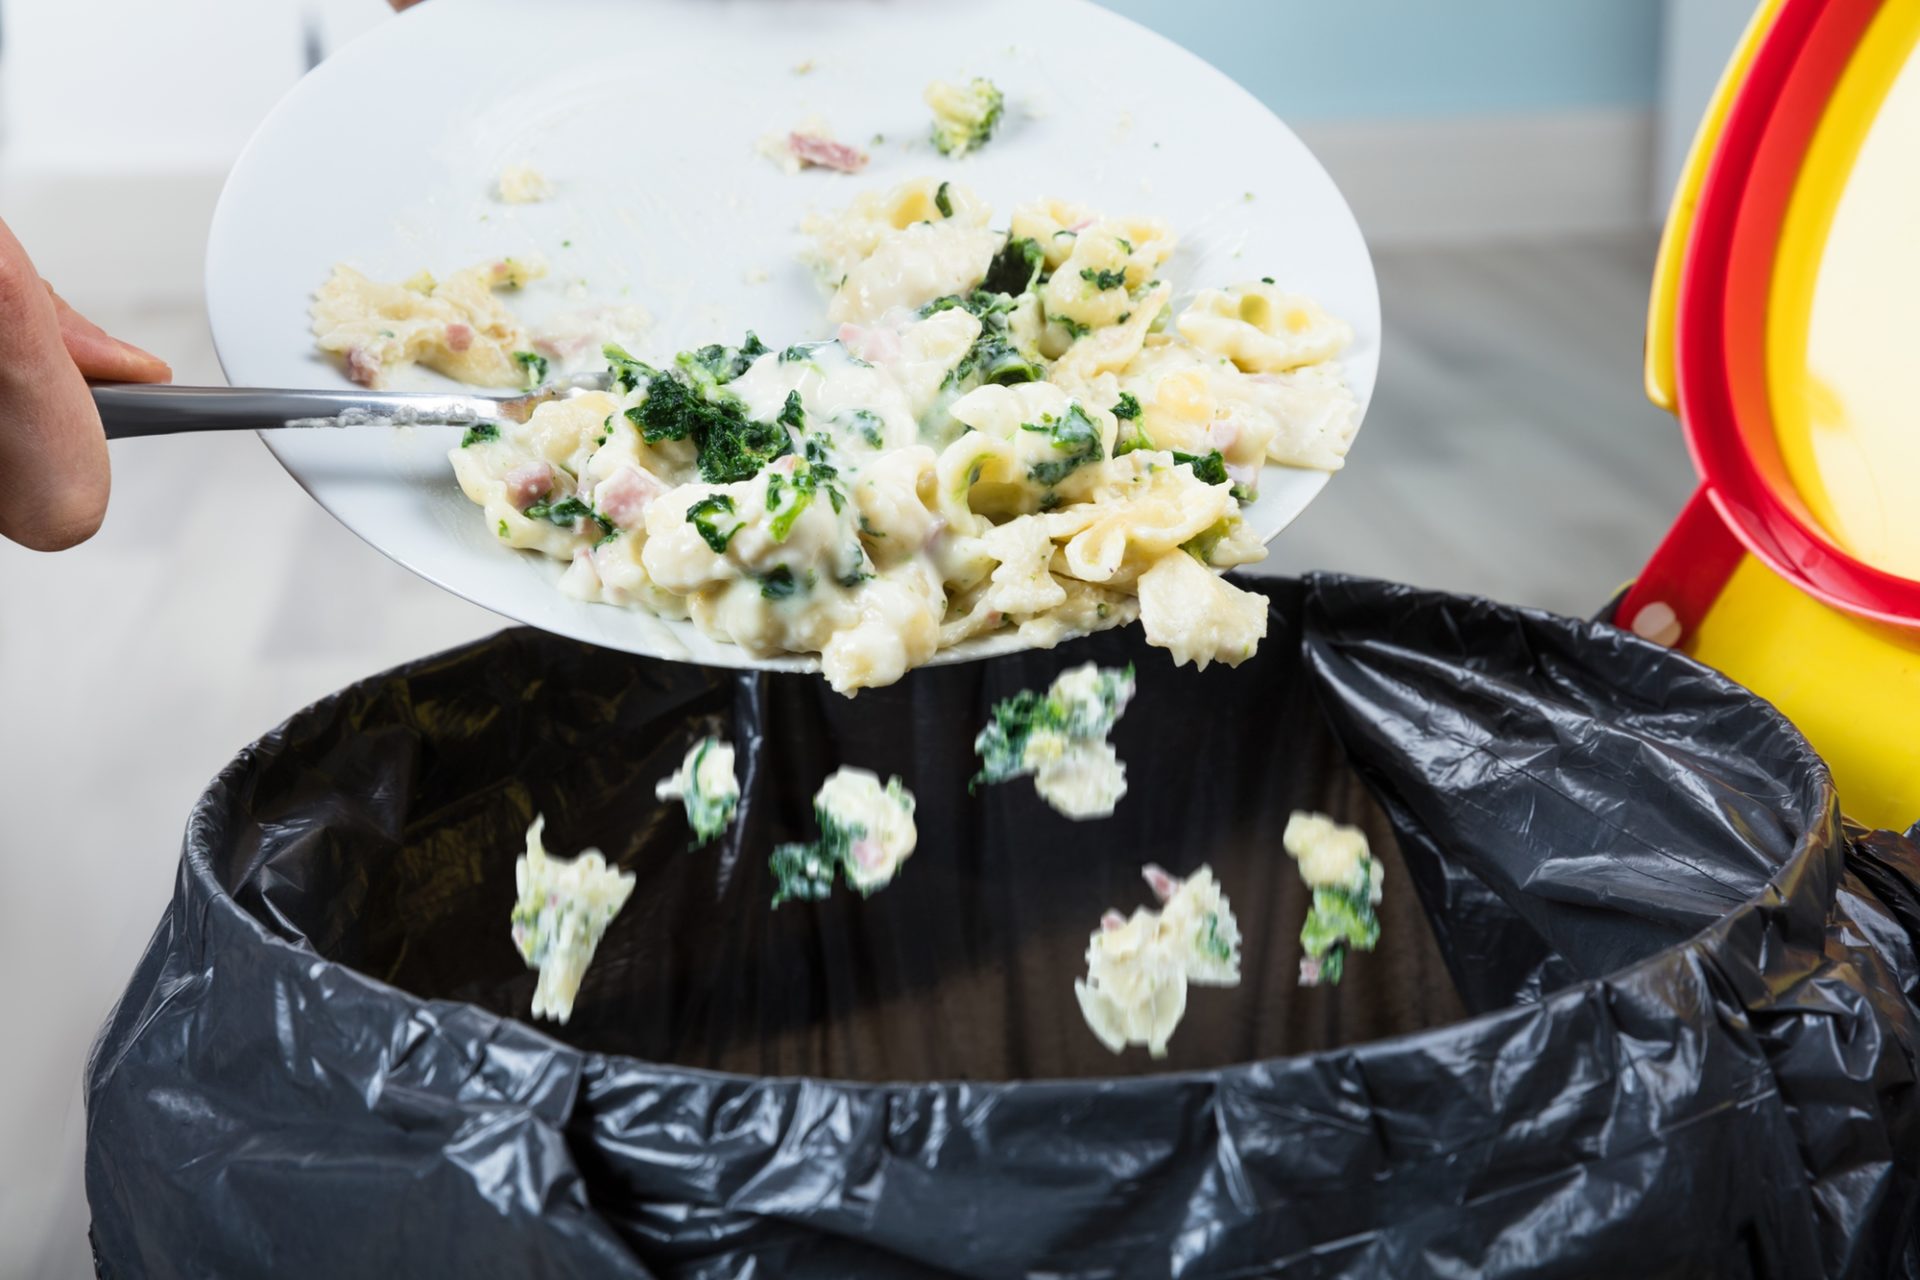 4 Benefits to Reducing Food Waste at Home 1